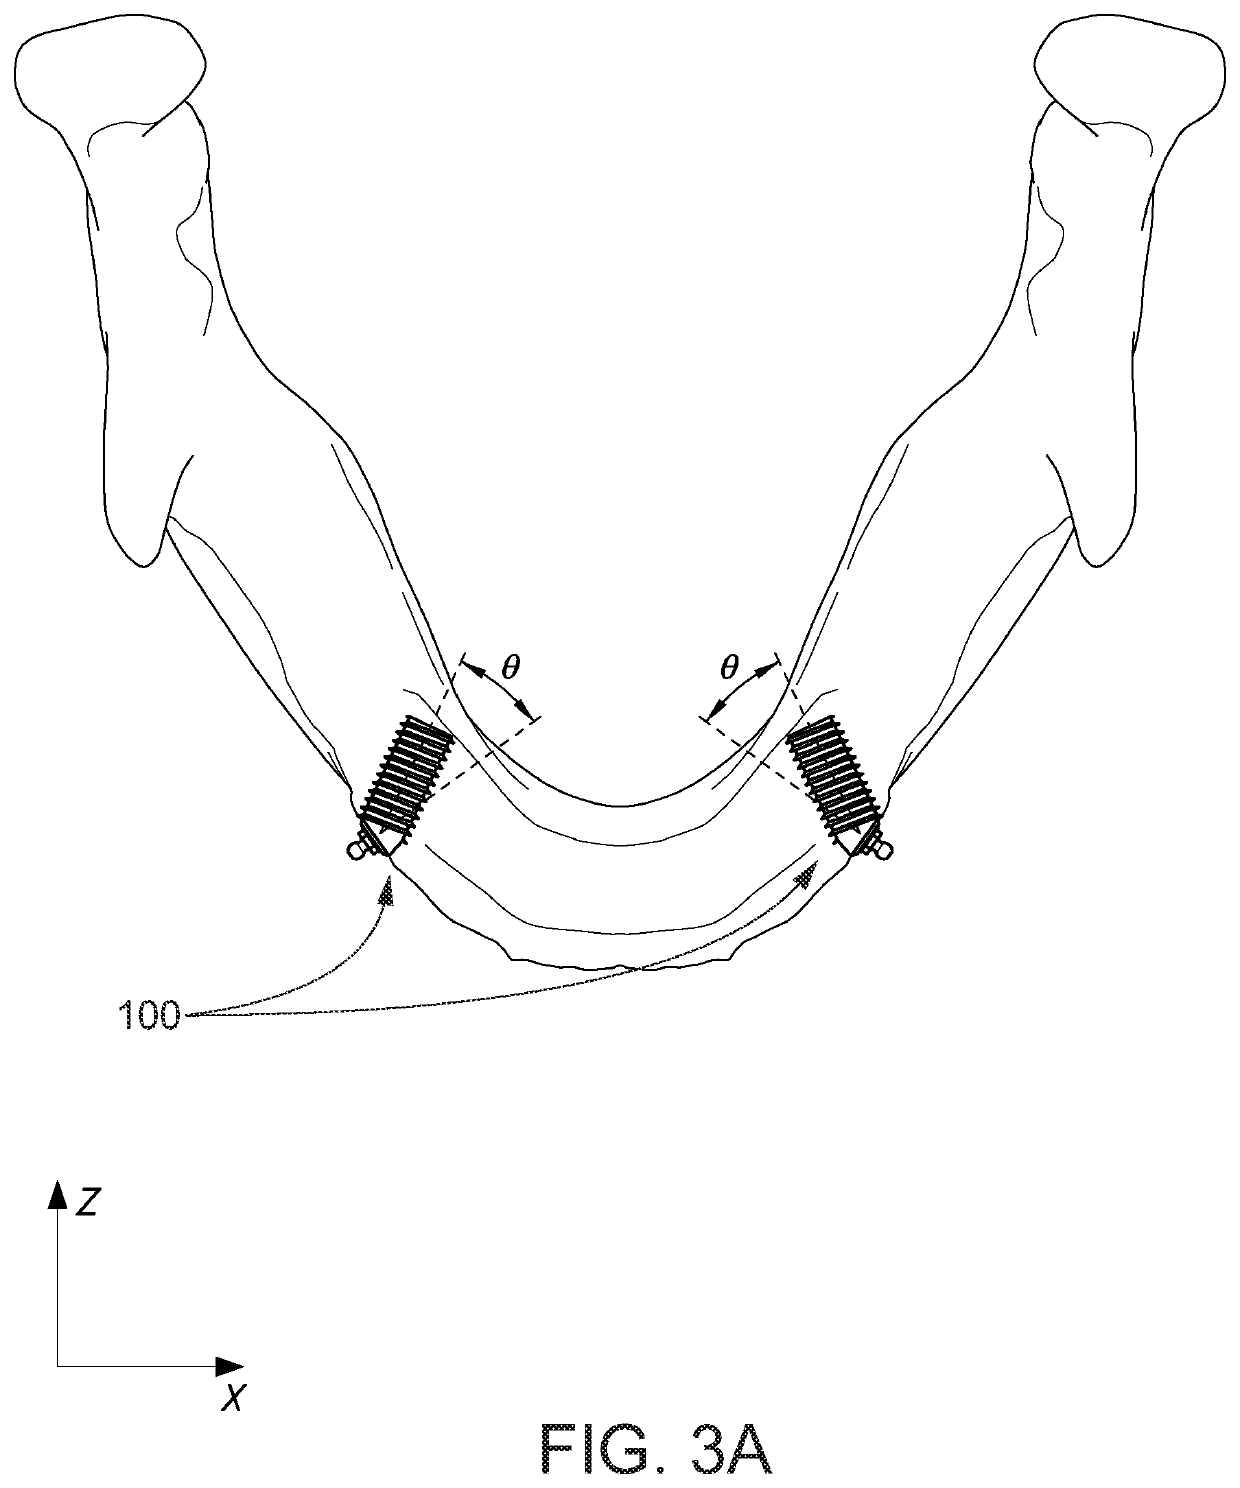 Endosteal horizontally placed dental implant system and method